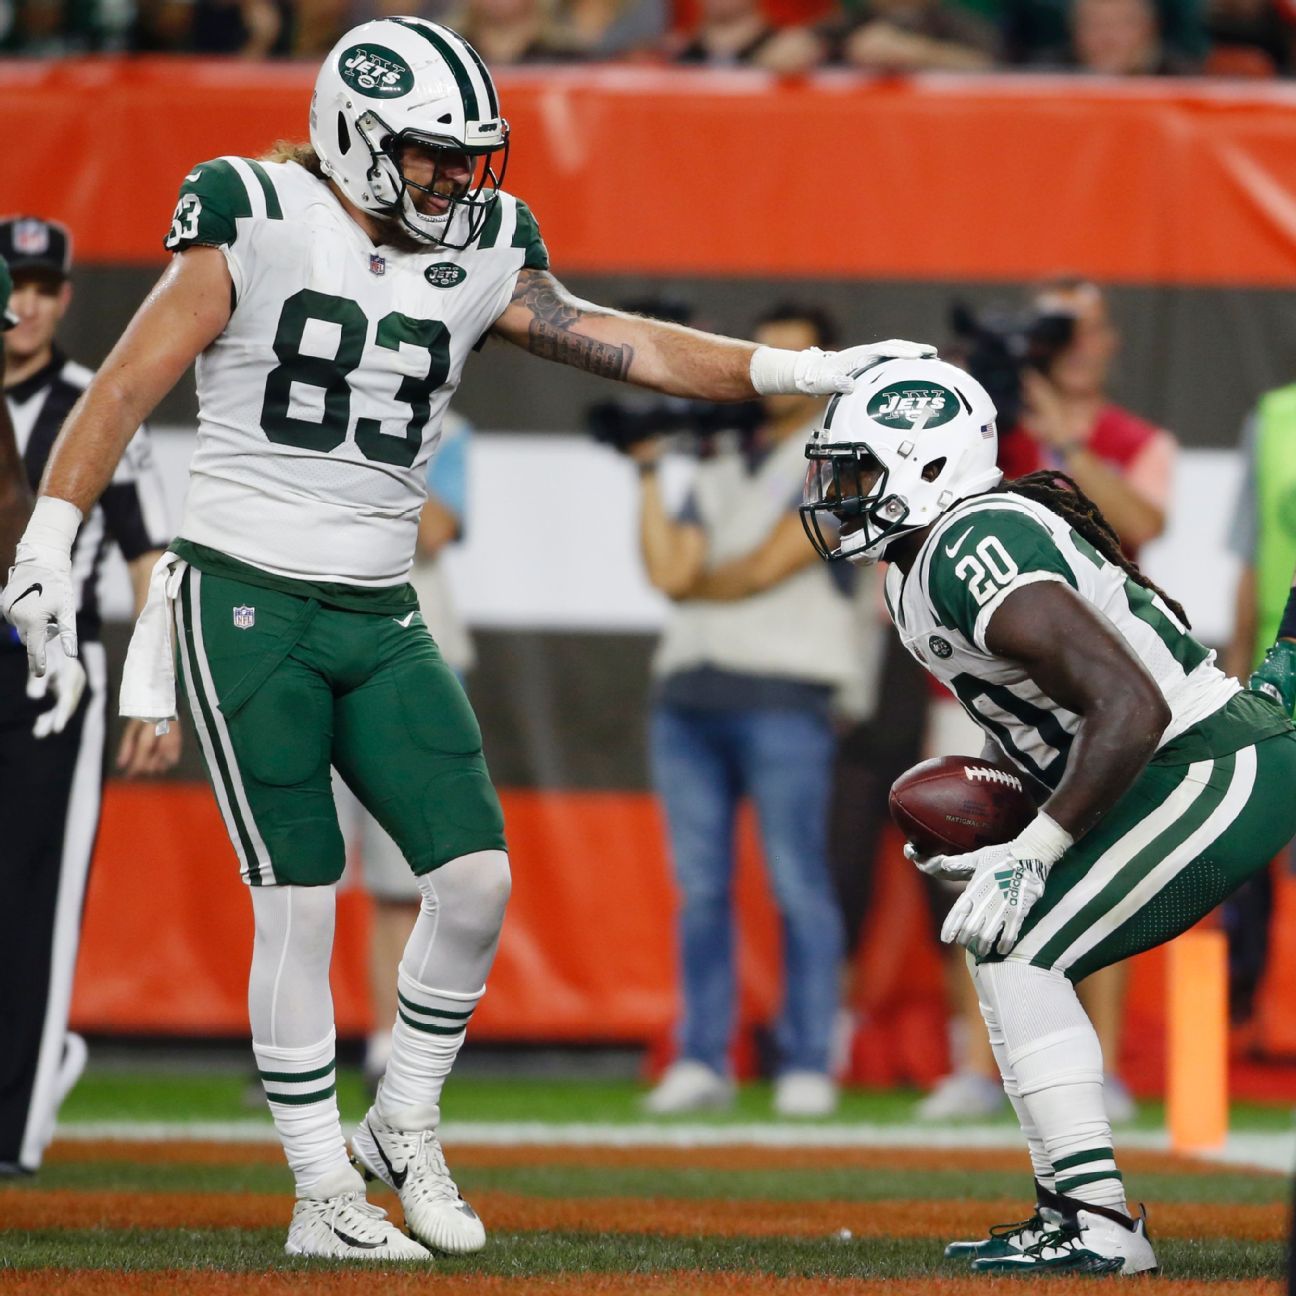 Isaiah Crowell, New York Jets running back, penalized for crude